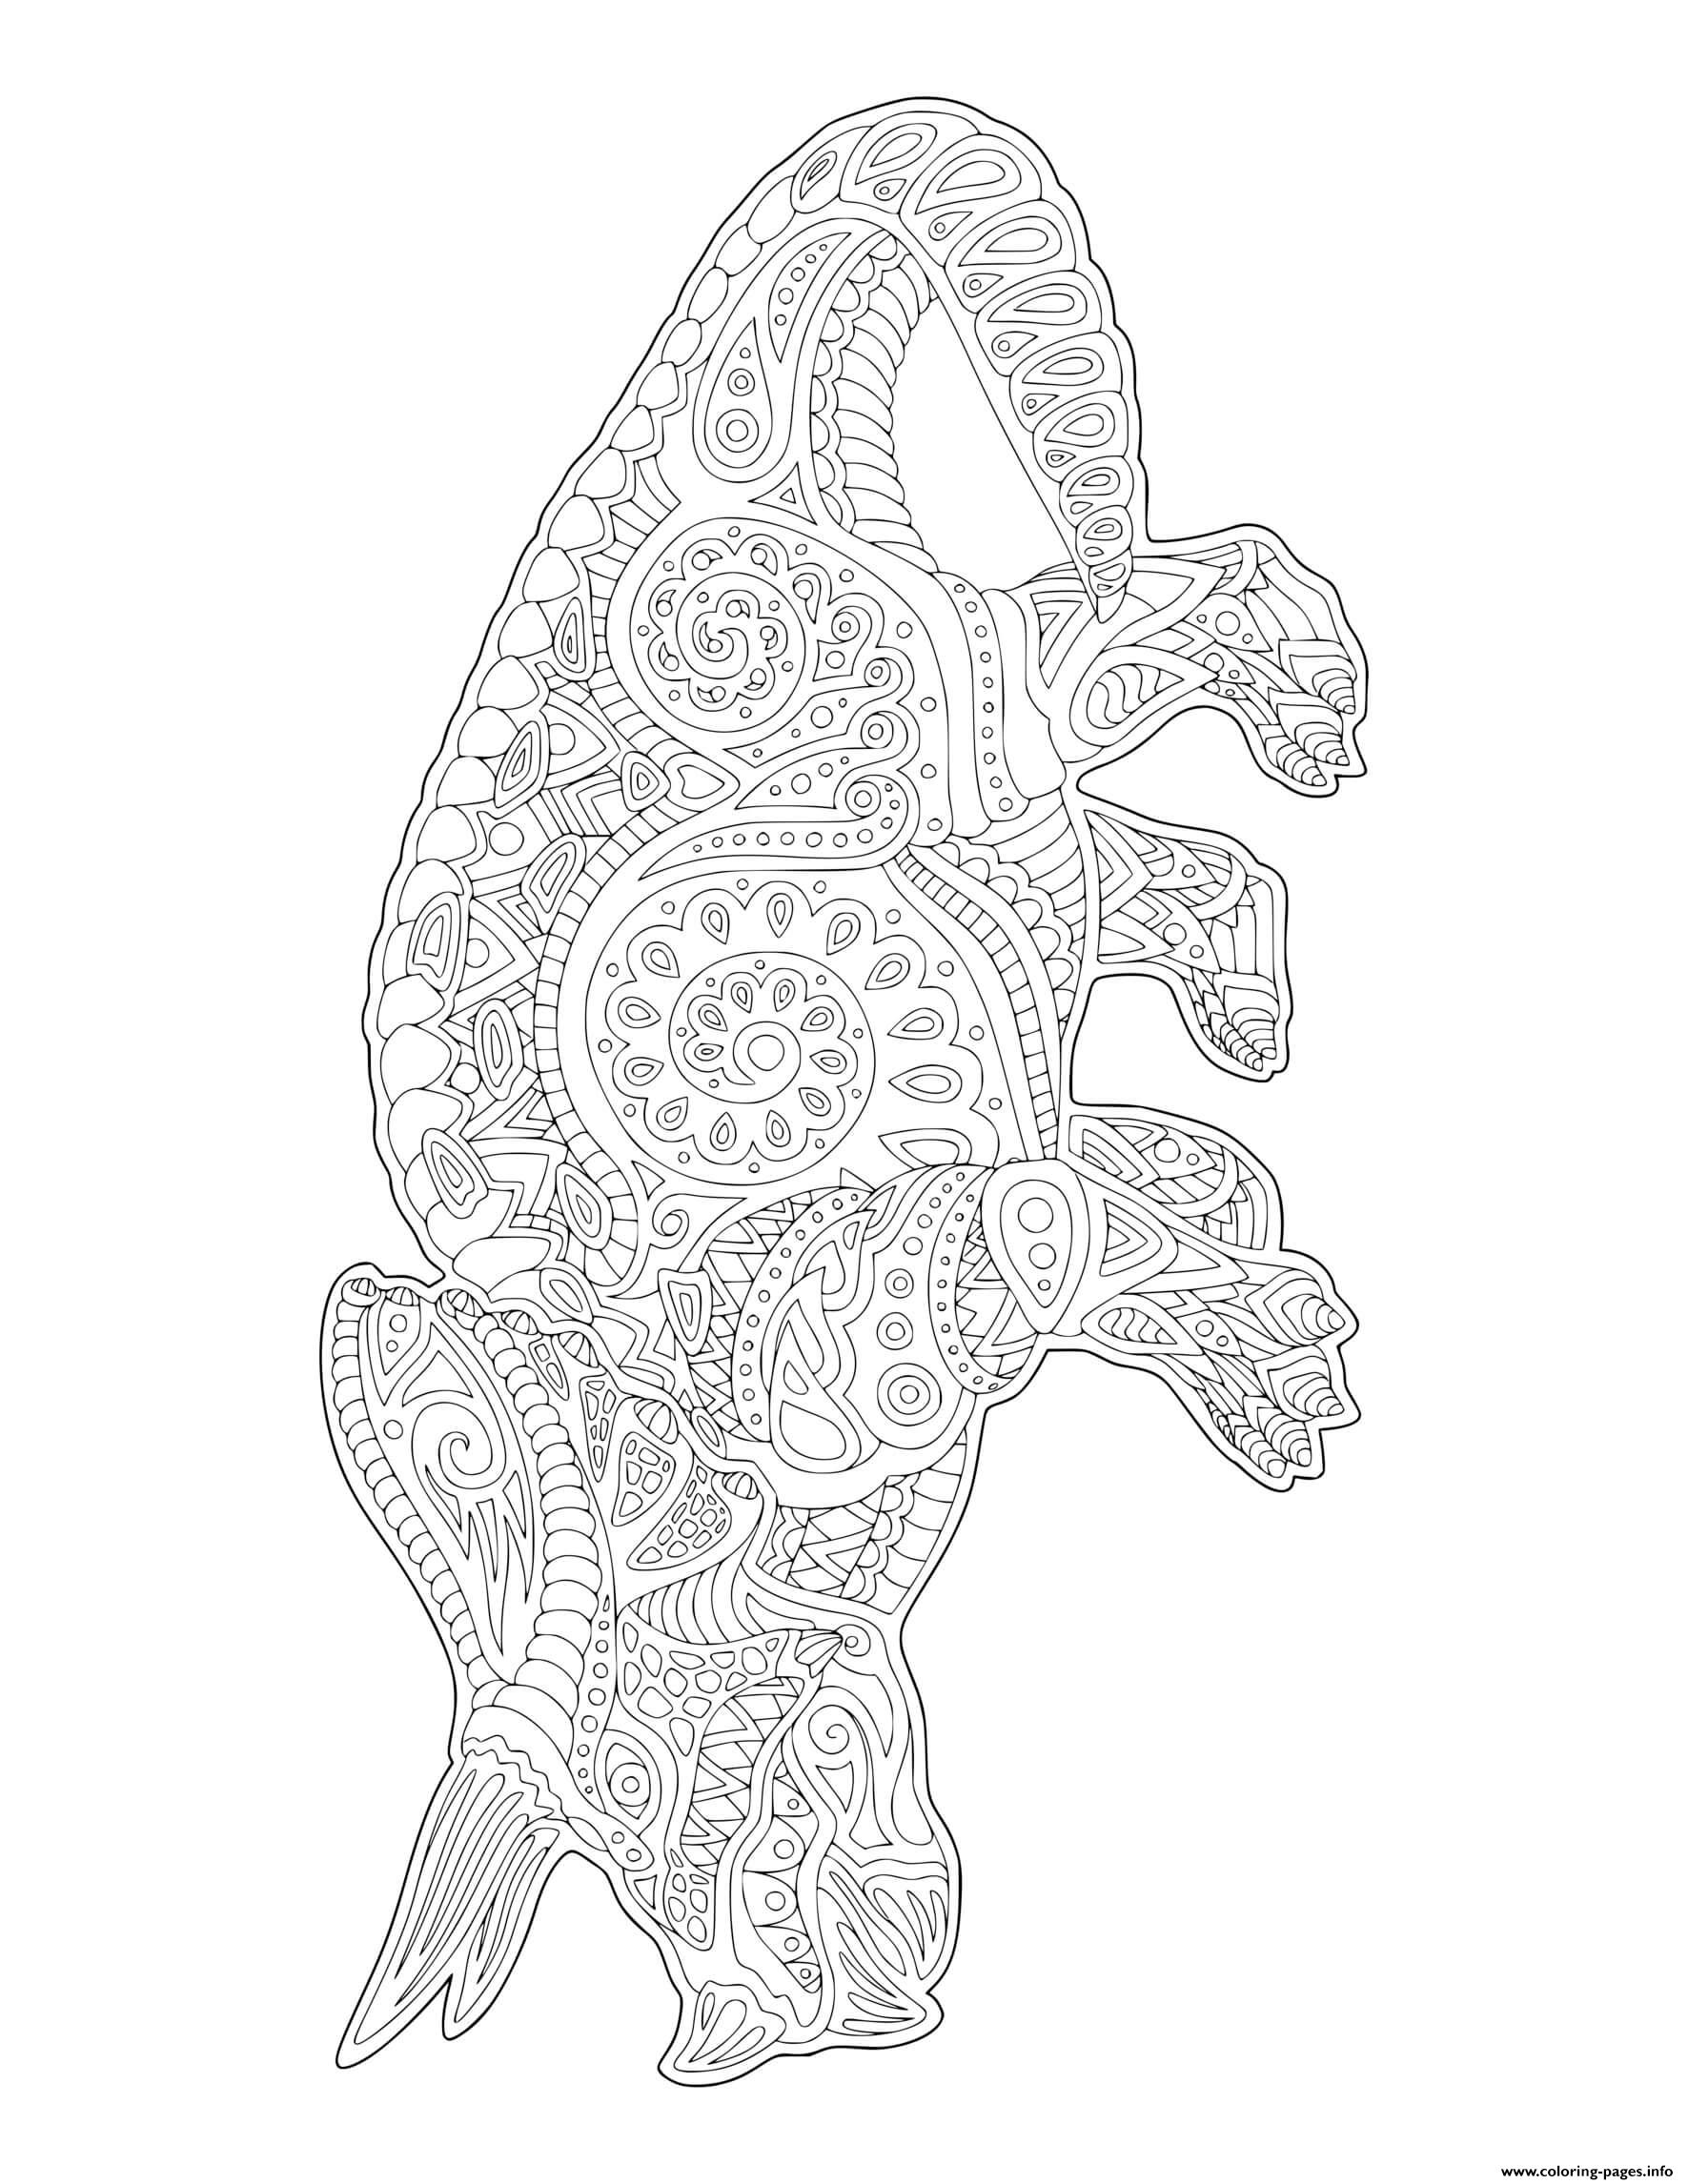 Dinosaur Triceratops Doodle For Adults coloring